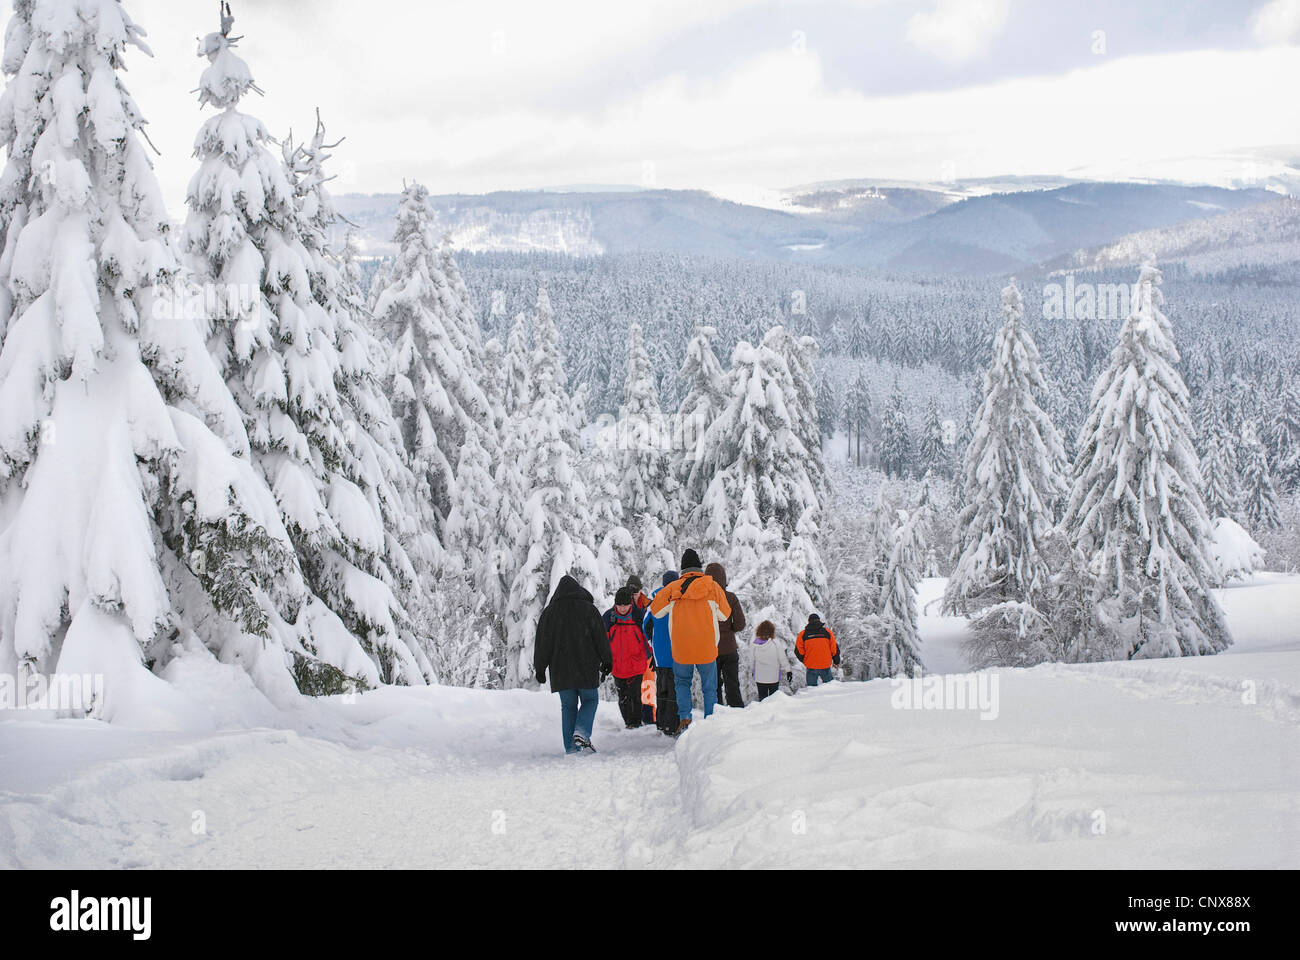 hiking group walking through a snow-covered forest landscape, Germany, North Rhine-Westphalia, Sauerland Stock Photo